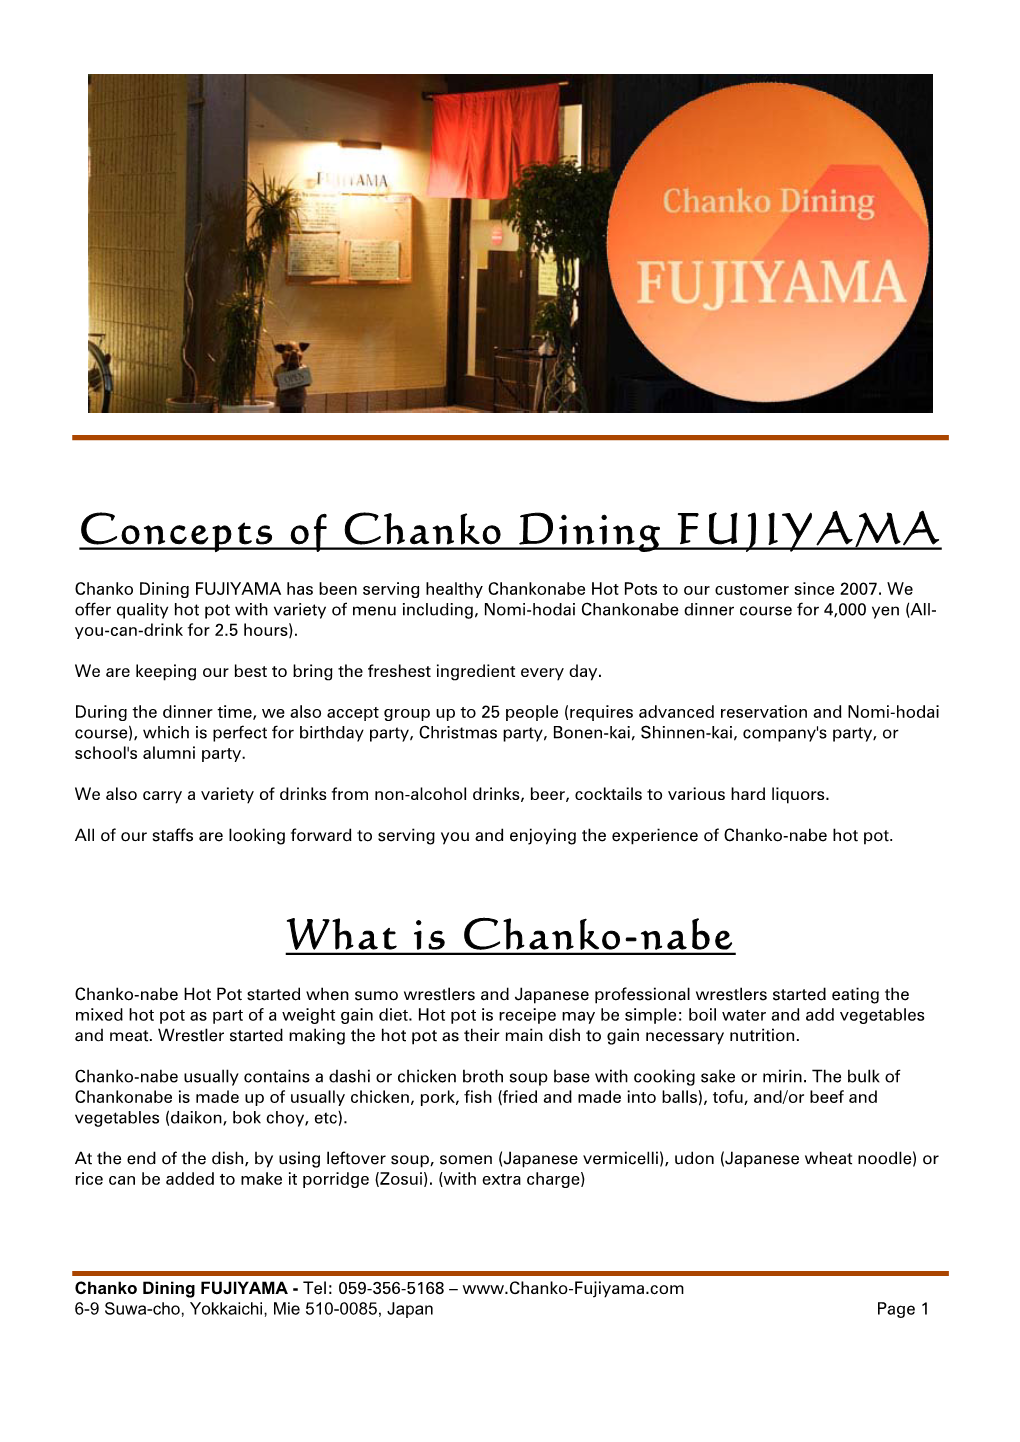 Concepts of Chanko Dining FUJIYAMA What Is Chanko-Nabe